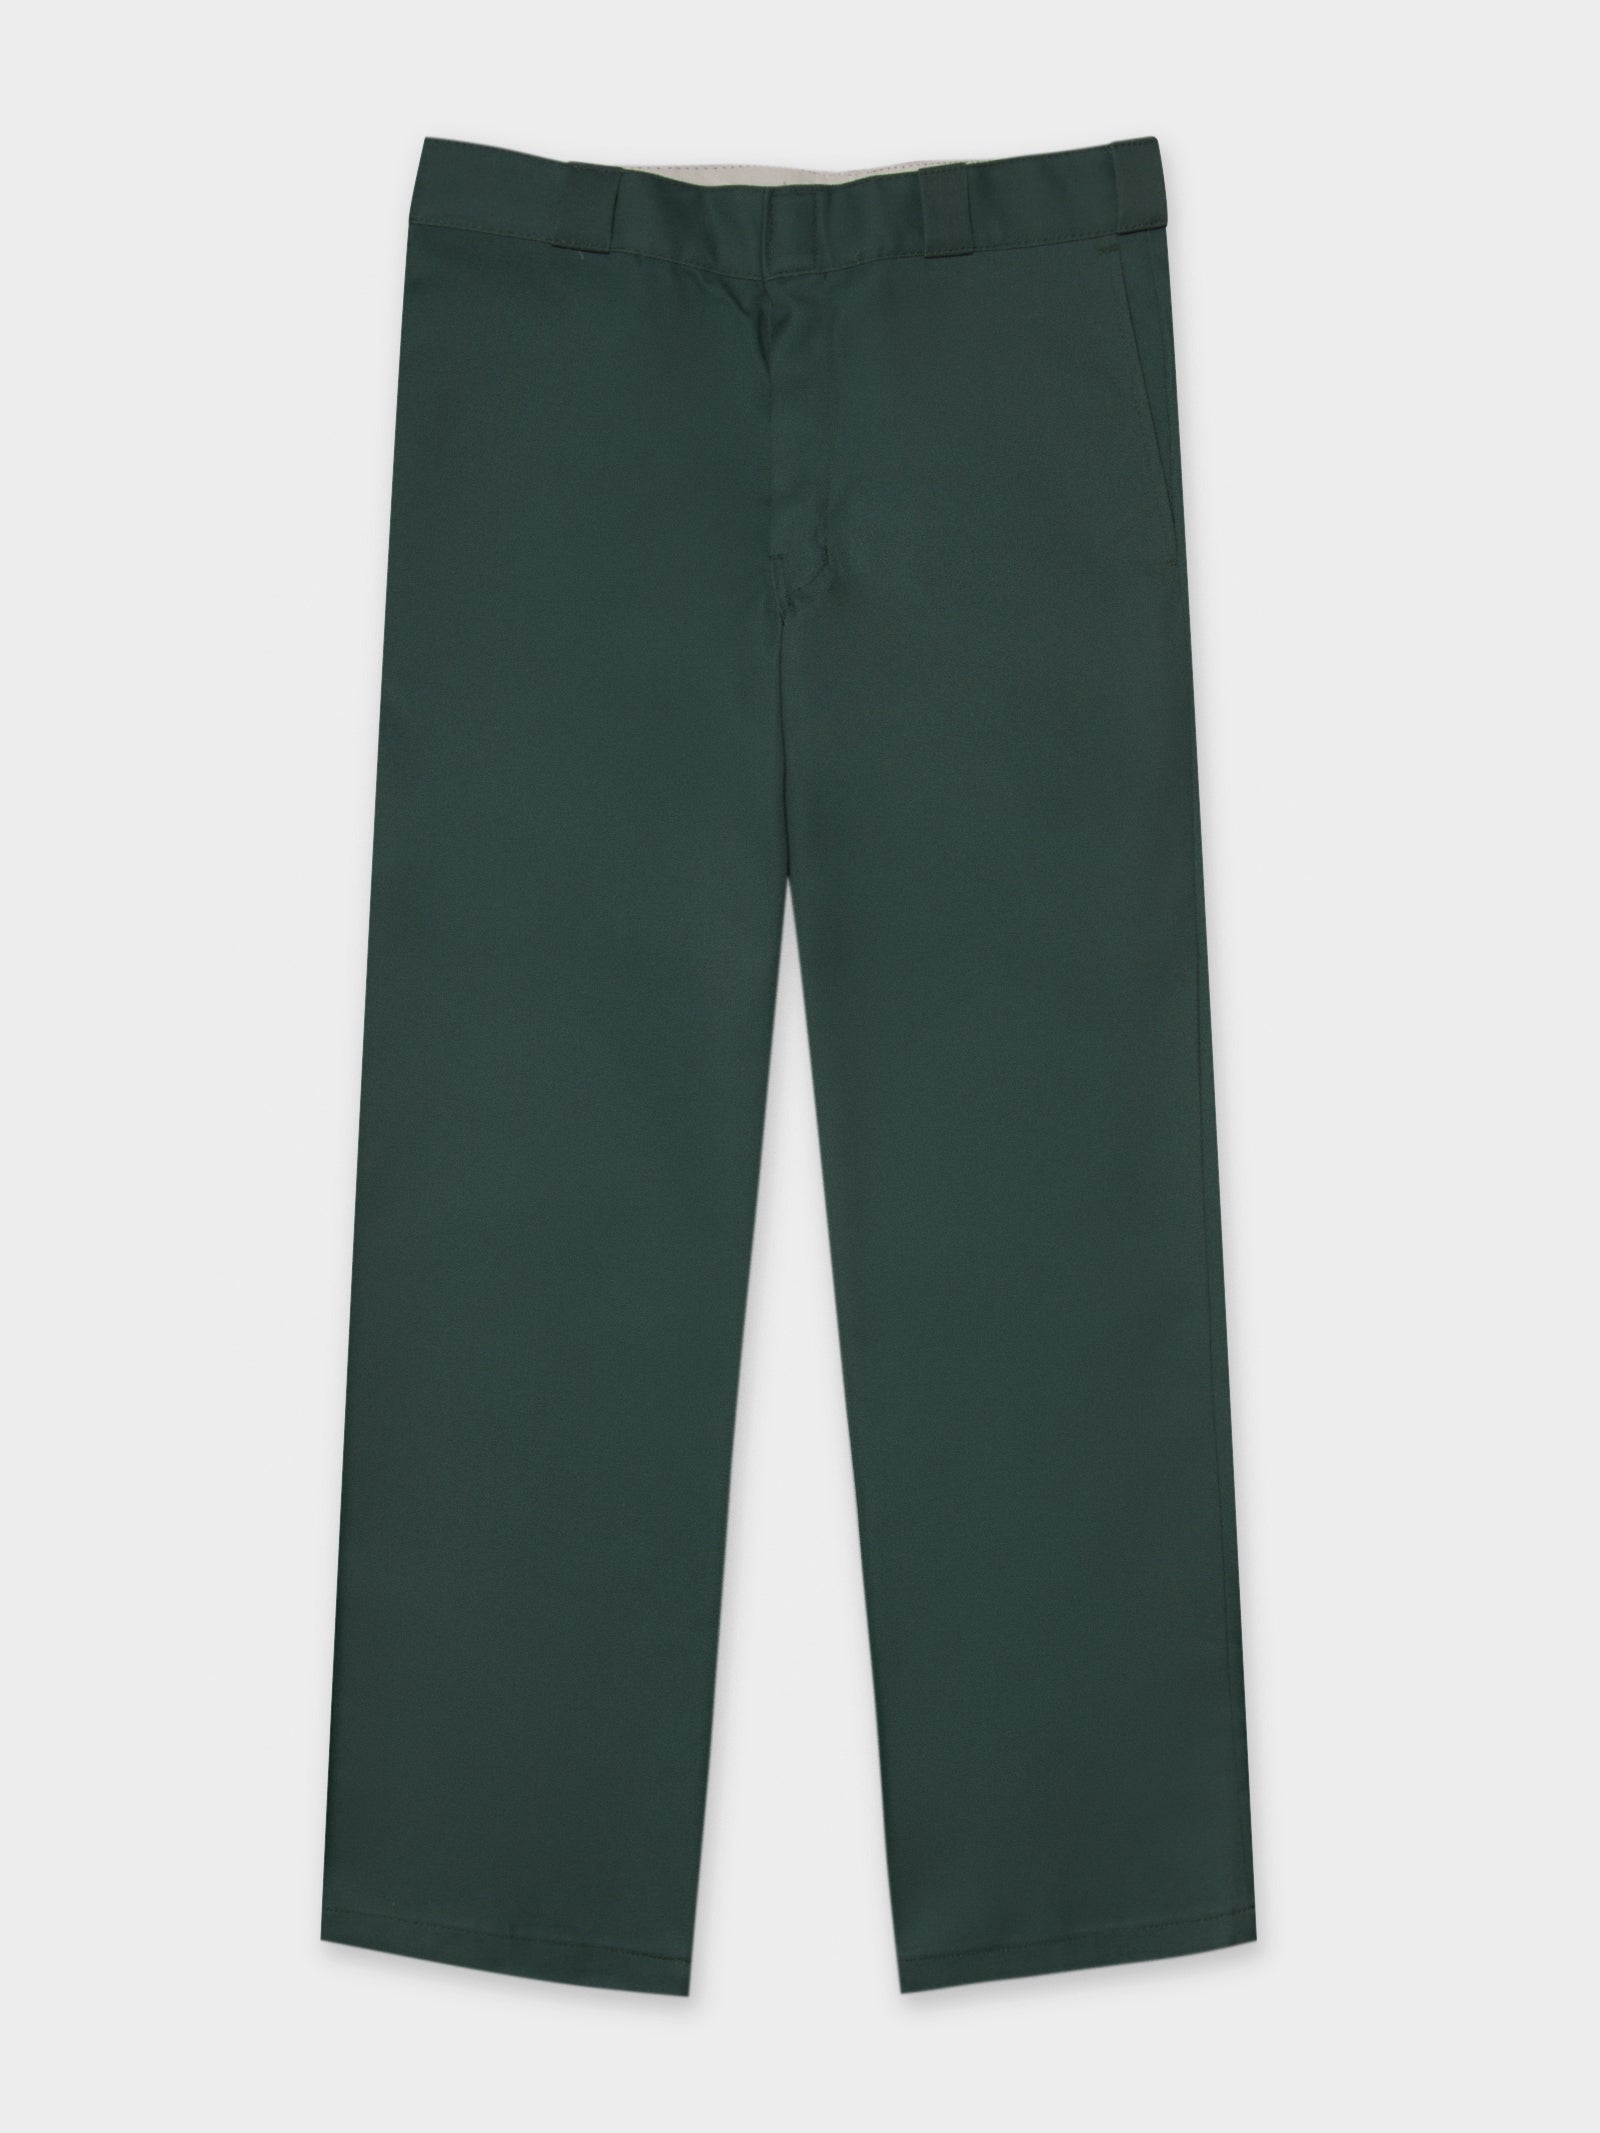 874 Pants in Green - Glue Store